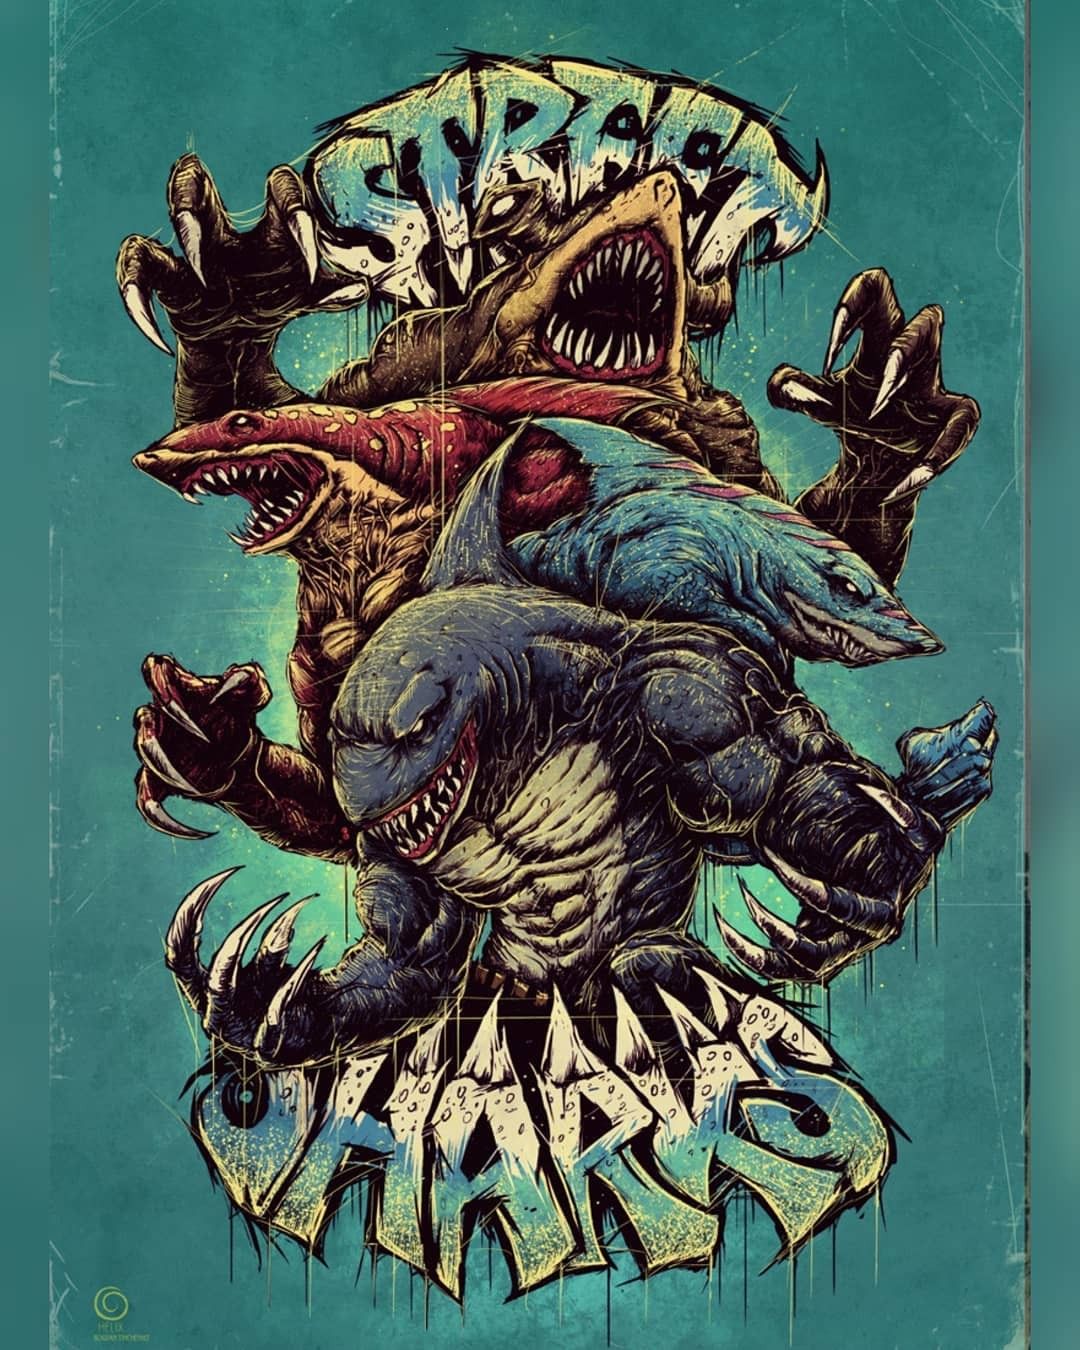 Pin By Courtney Cooper On 80's 90's Toons. Shark Art, Badass Drawings, Shark